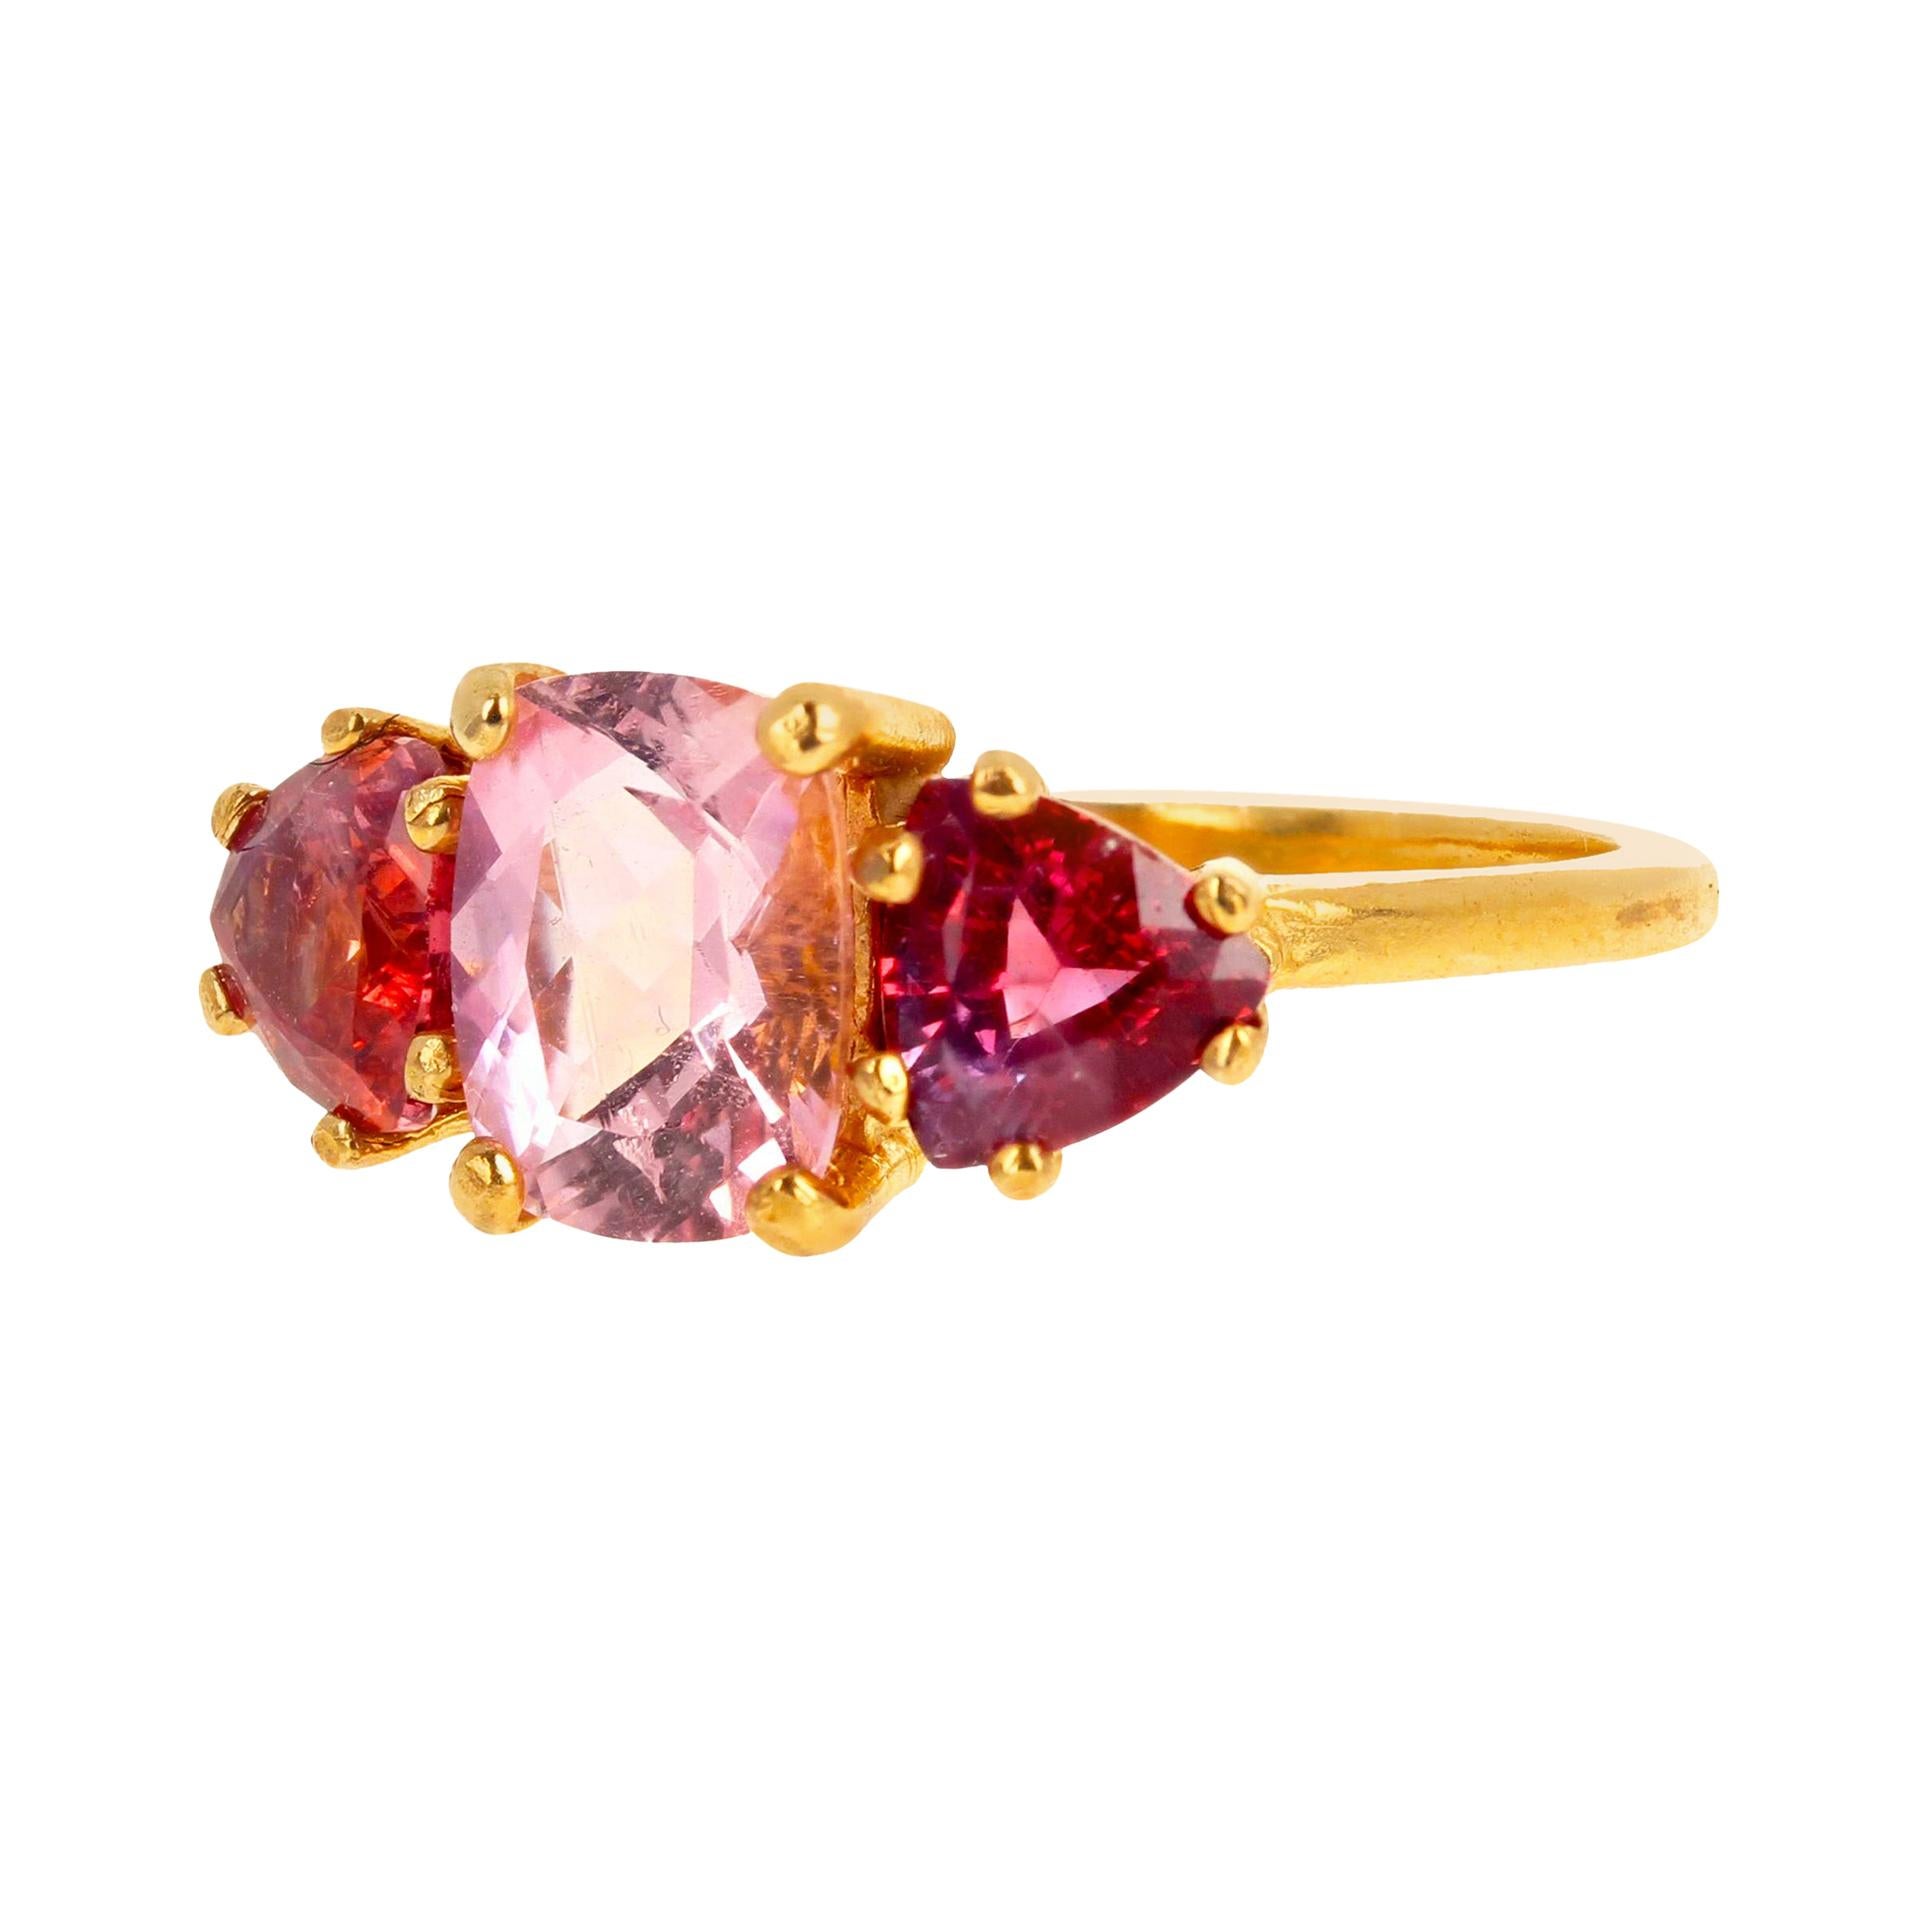 Gemjunky Exotic Three Stone Pink Tourmaline & Red Spinel 14 Kt Yellow Gold Ring